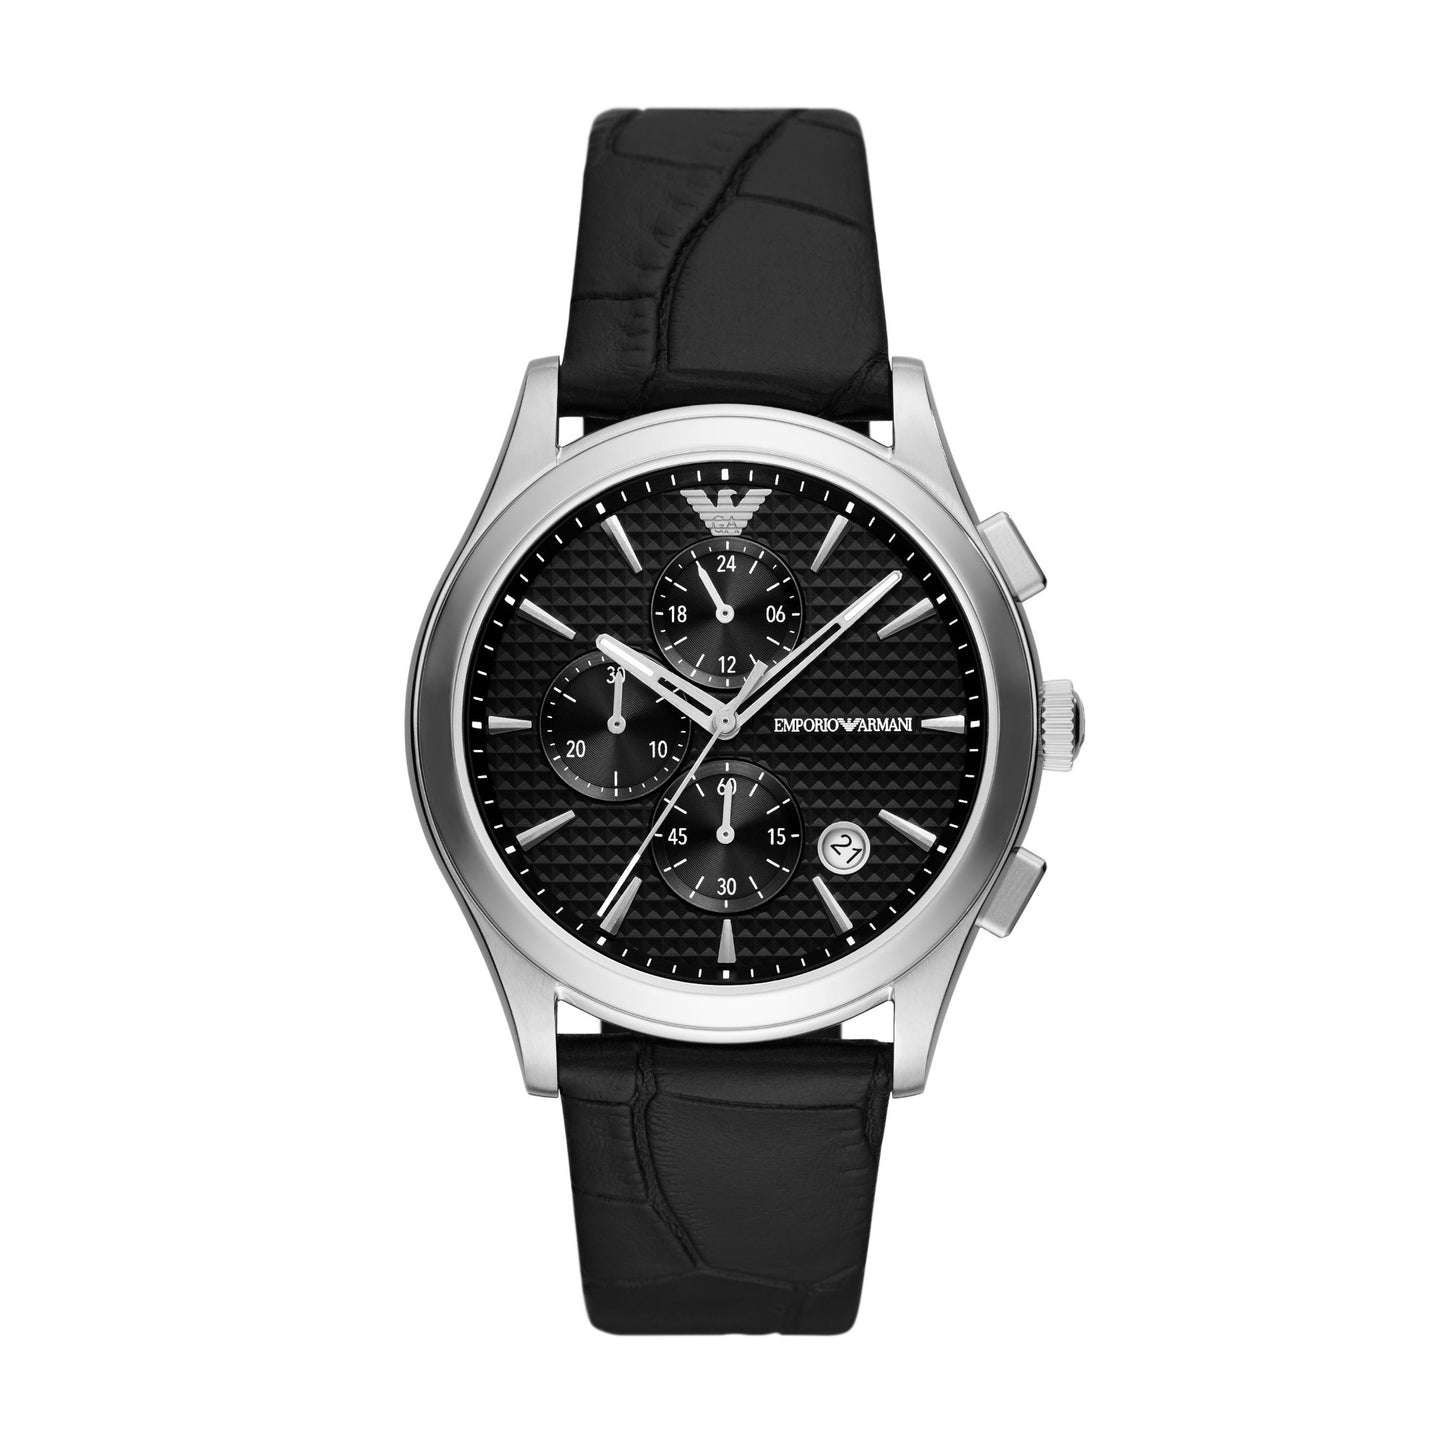 Emporio Armani 42mm Paolo Chronographic Black Dial Leather Watch